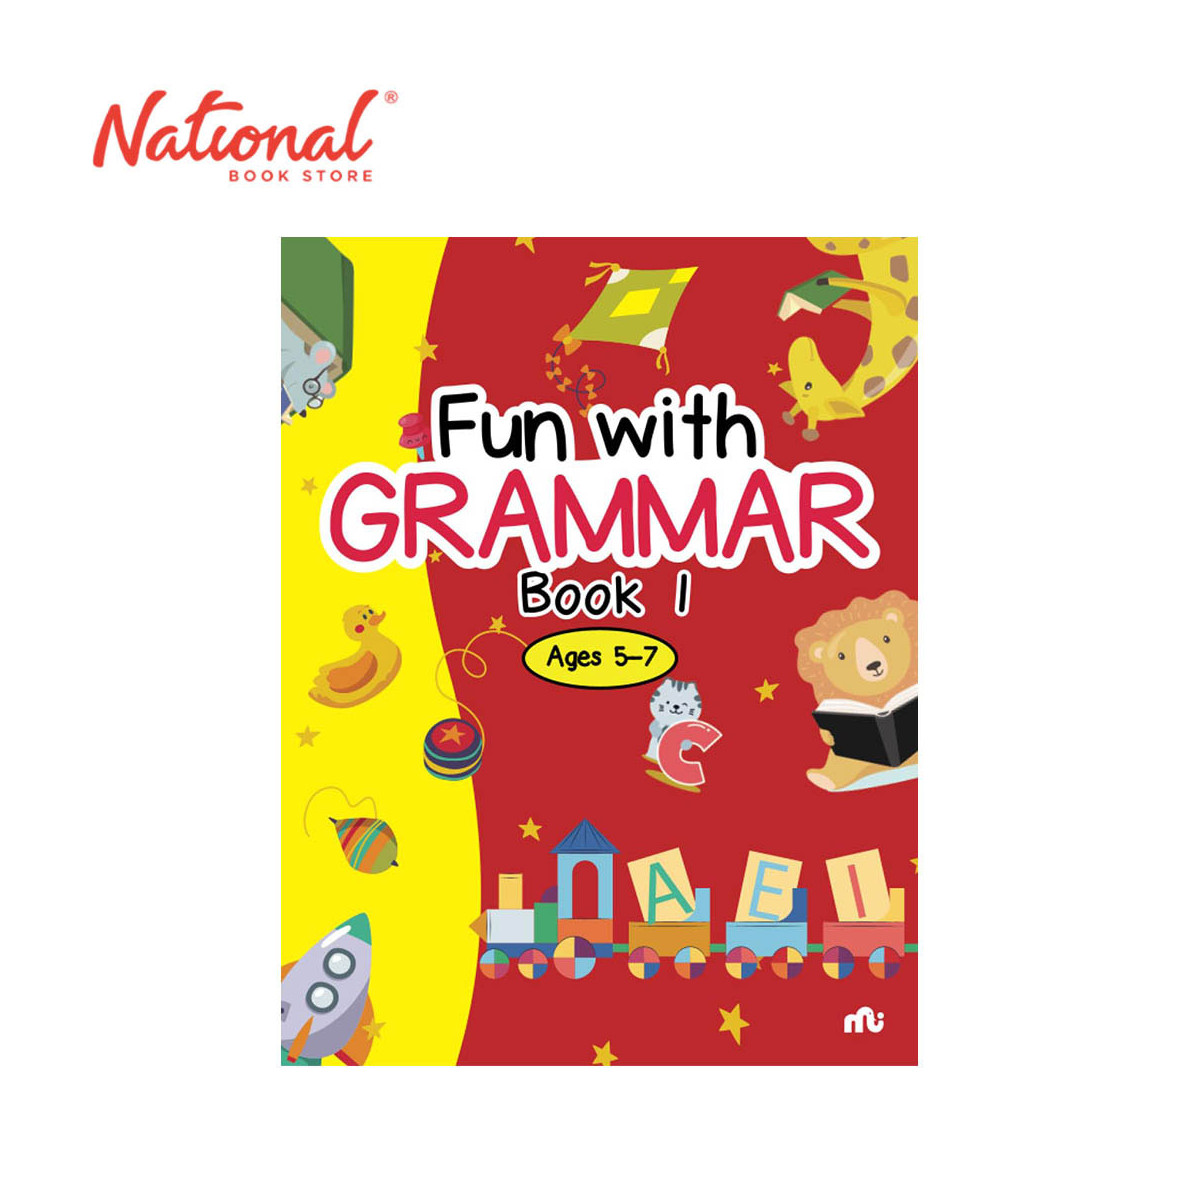 Fun with Grammar Book 1 - Trade Paperback - Activity Books for Kids